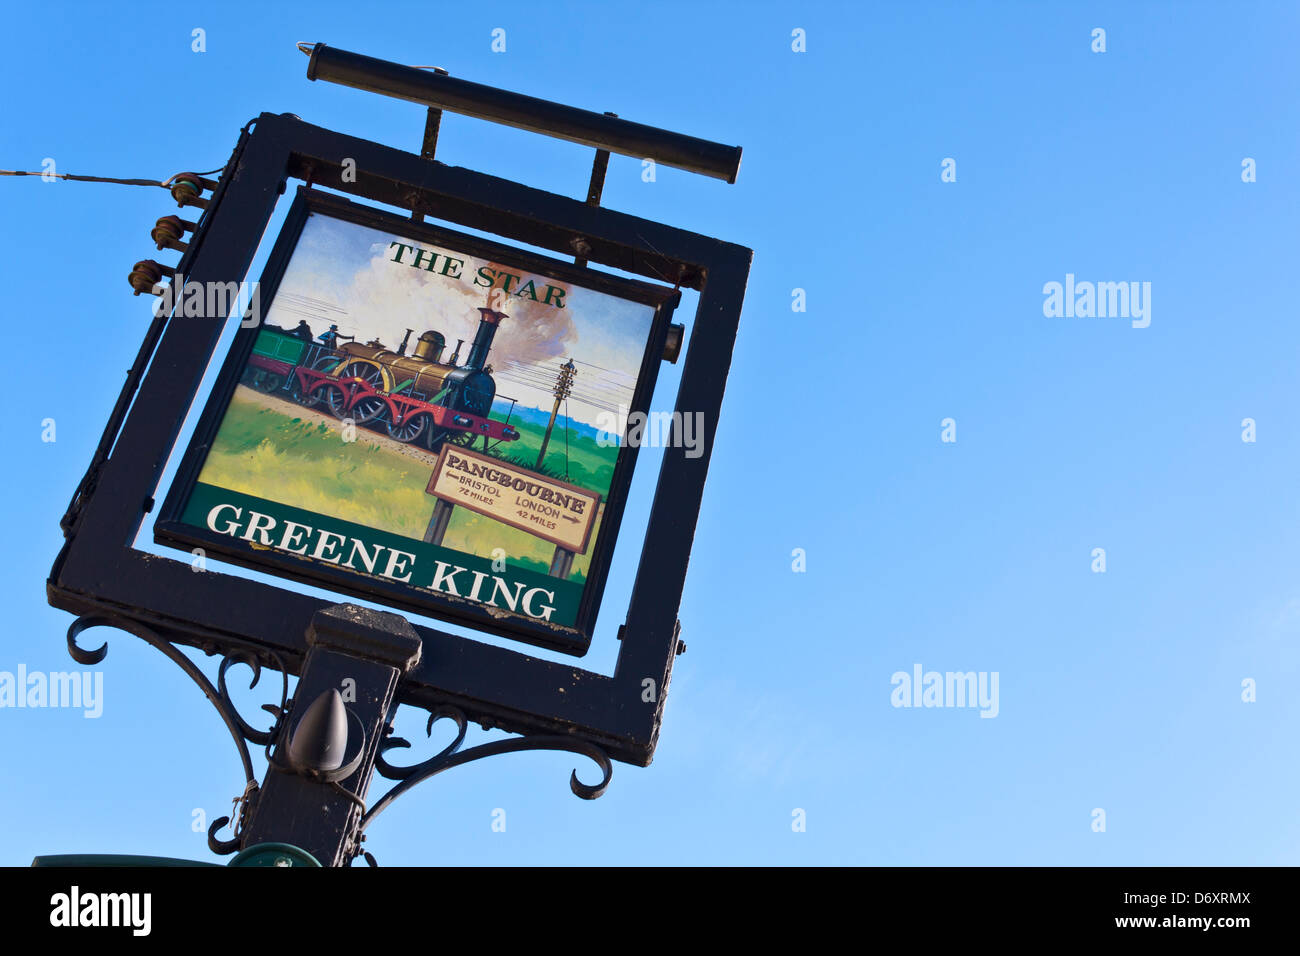 Pub sign of 'The Star' at Pangbourne, Berkshire, a Greene King public house. Stock Photo